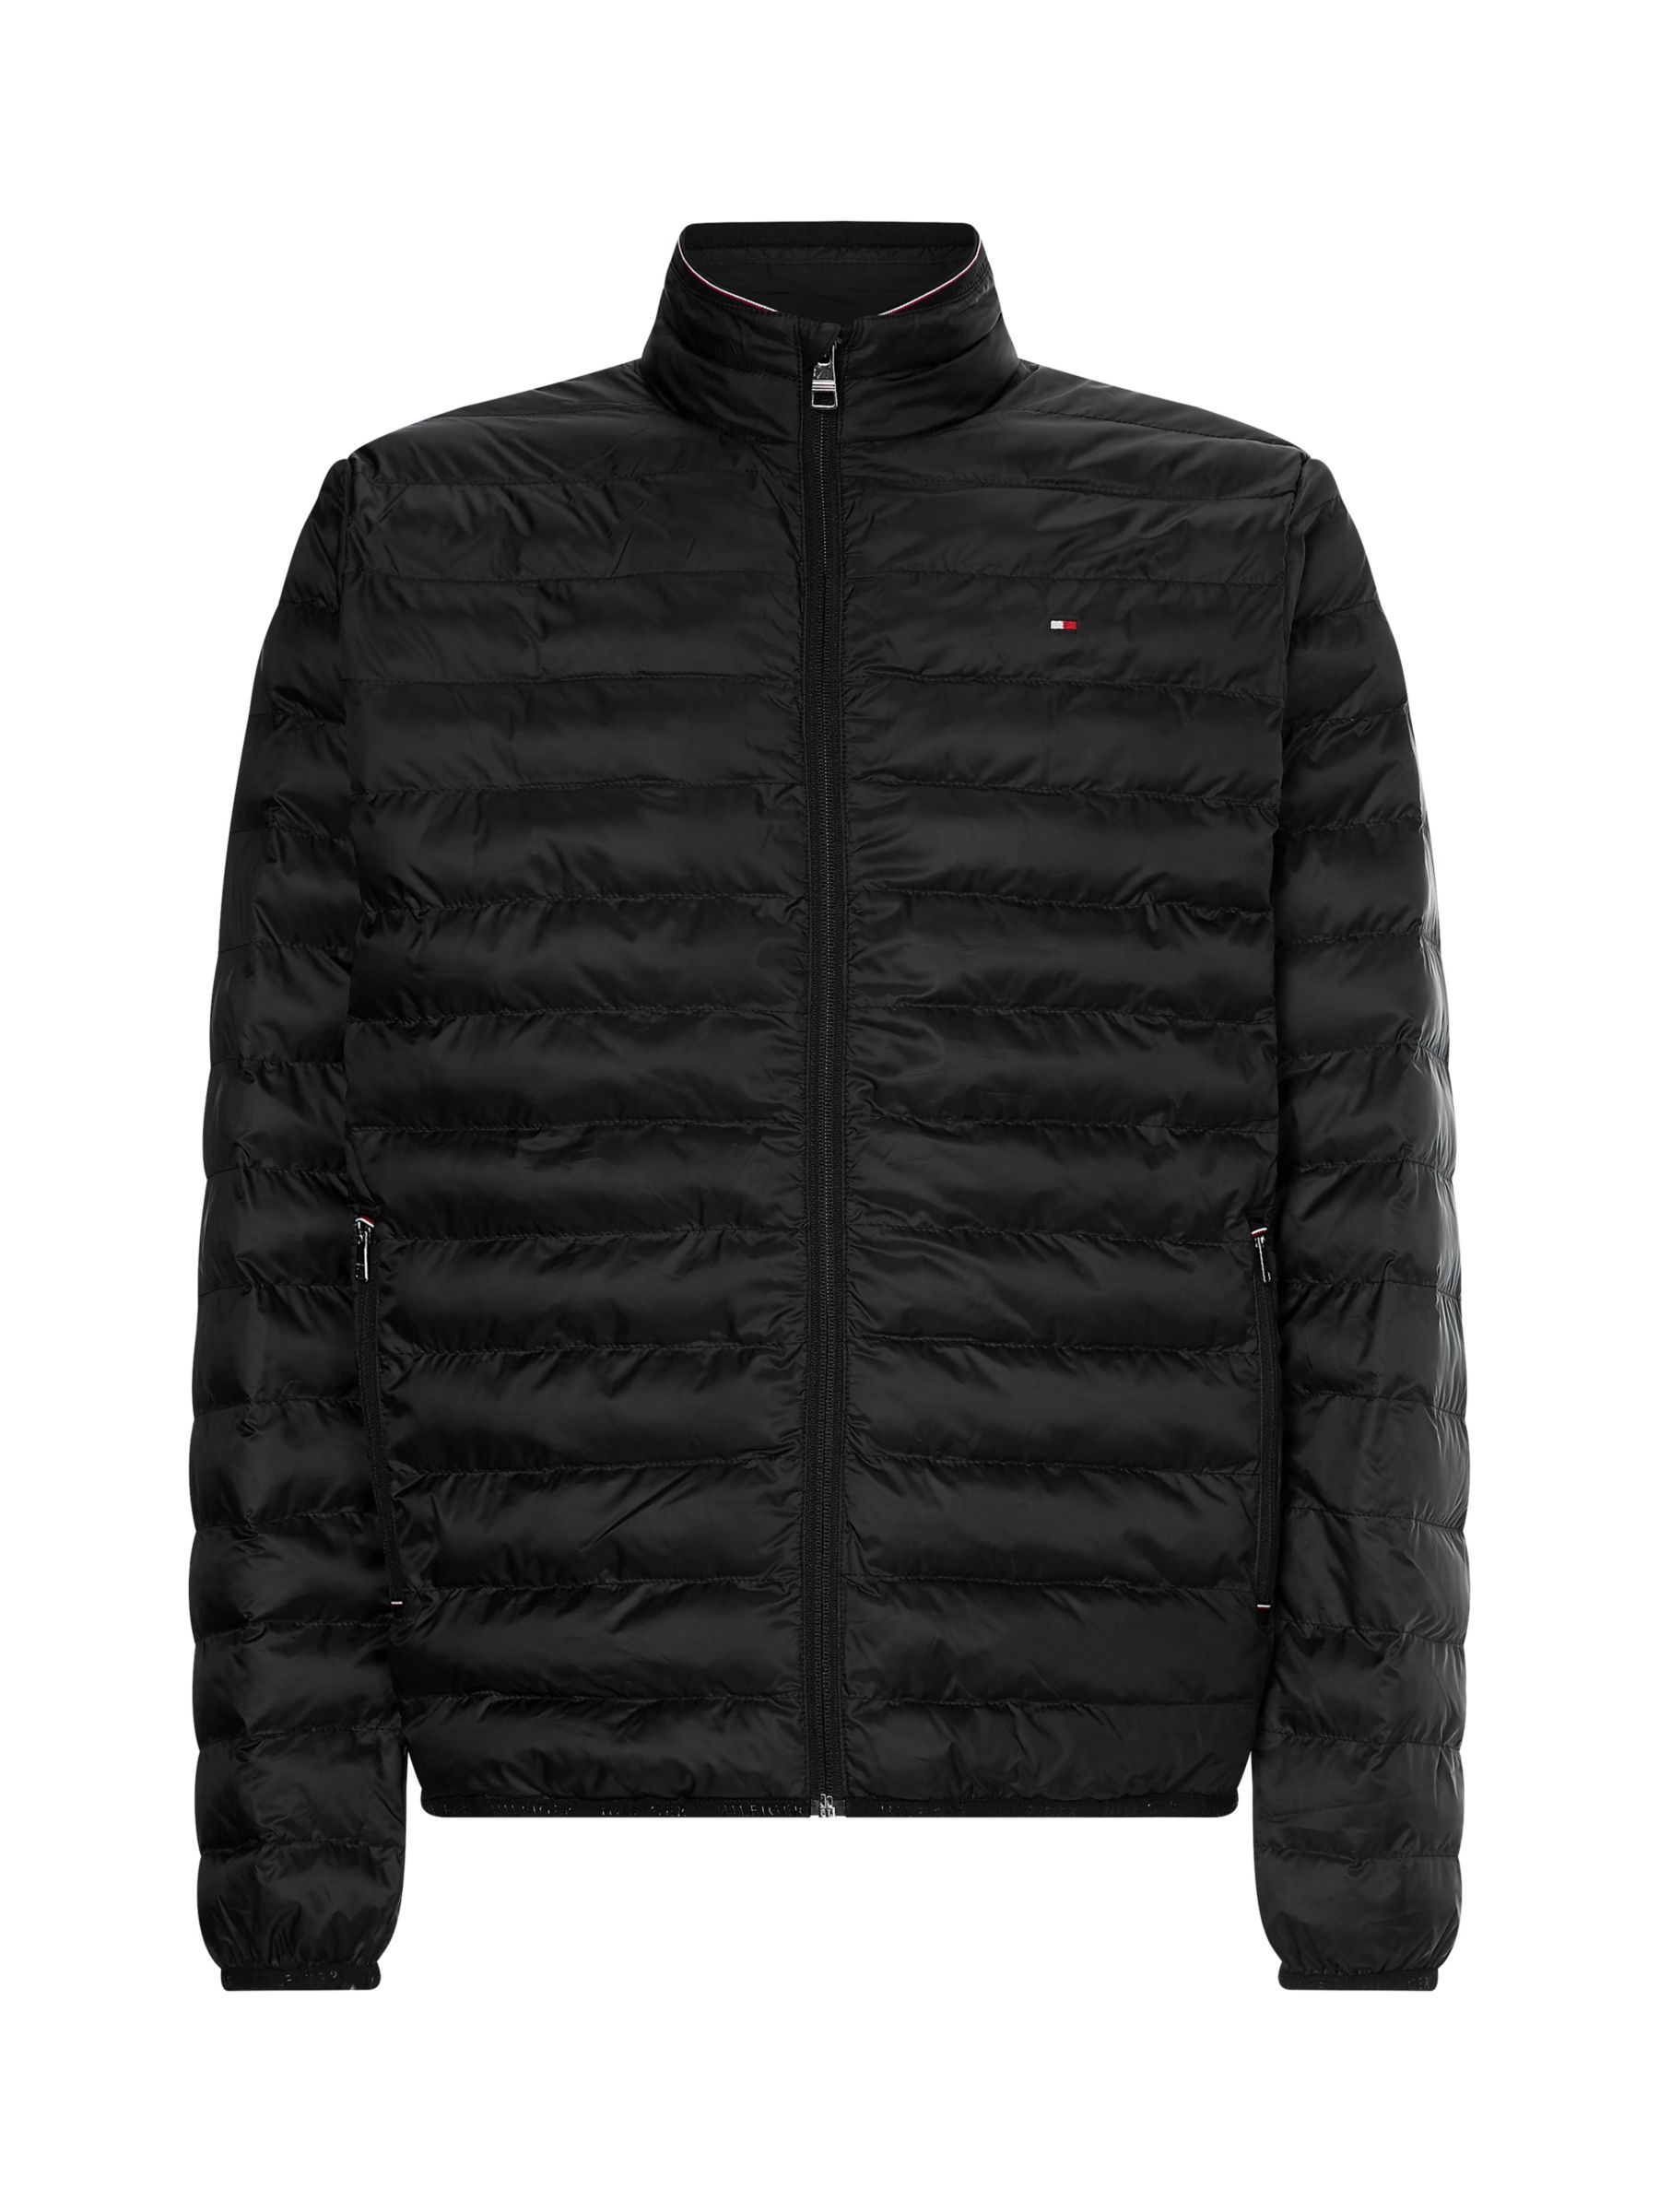 Buy Tommy Hilfiger Packable Down Quilted Jacket Online at johnlewis.com